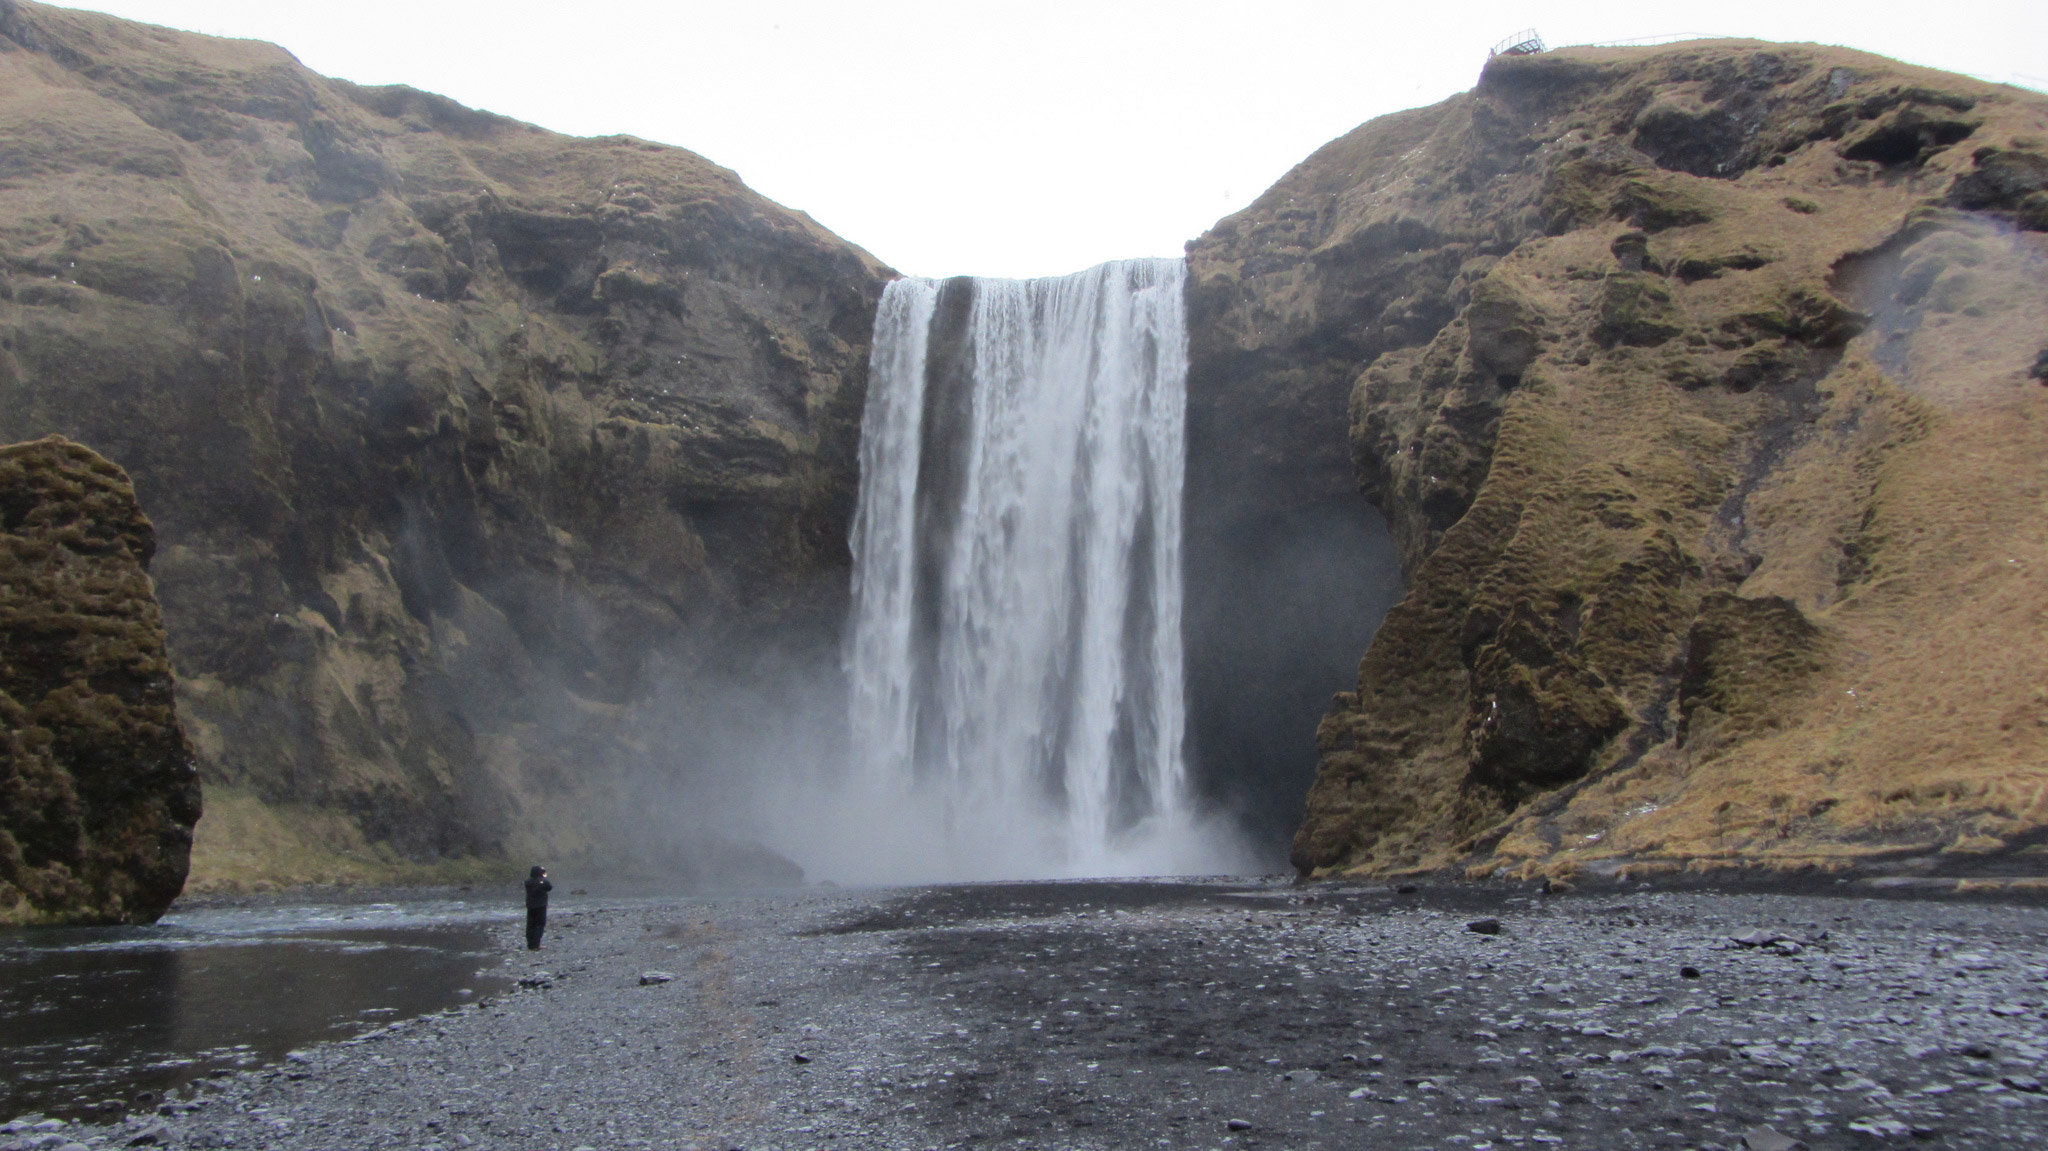 The enormous waterfall at Skógafoss